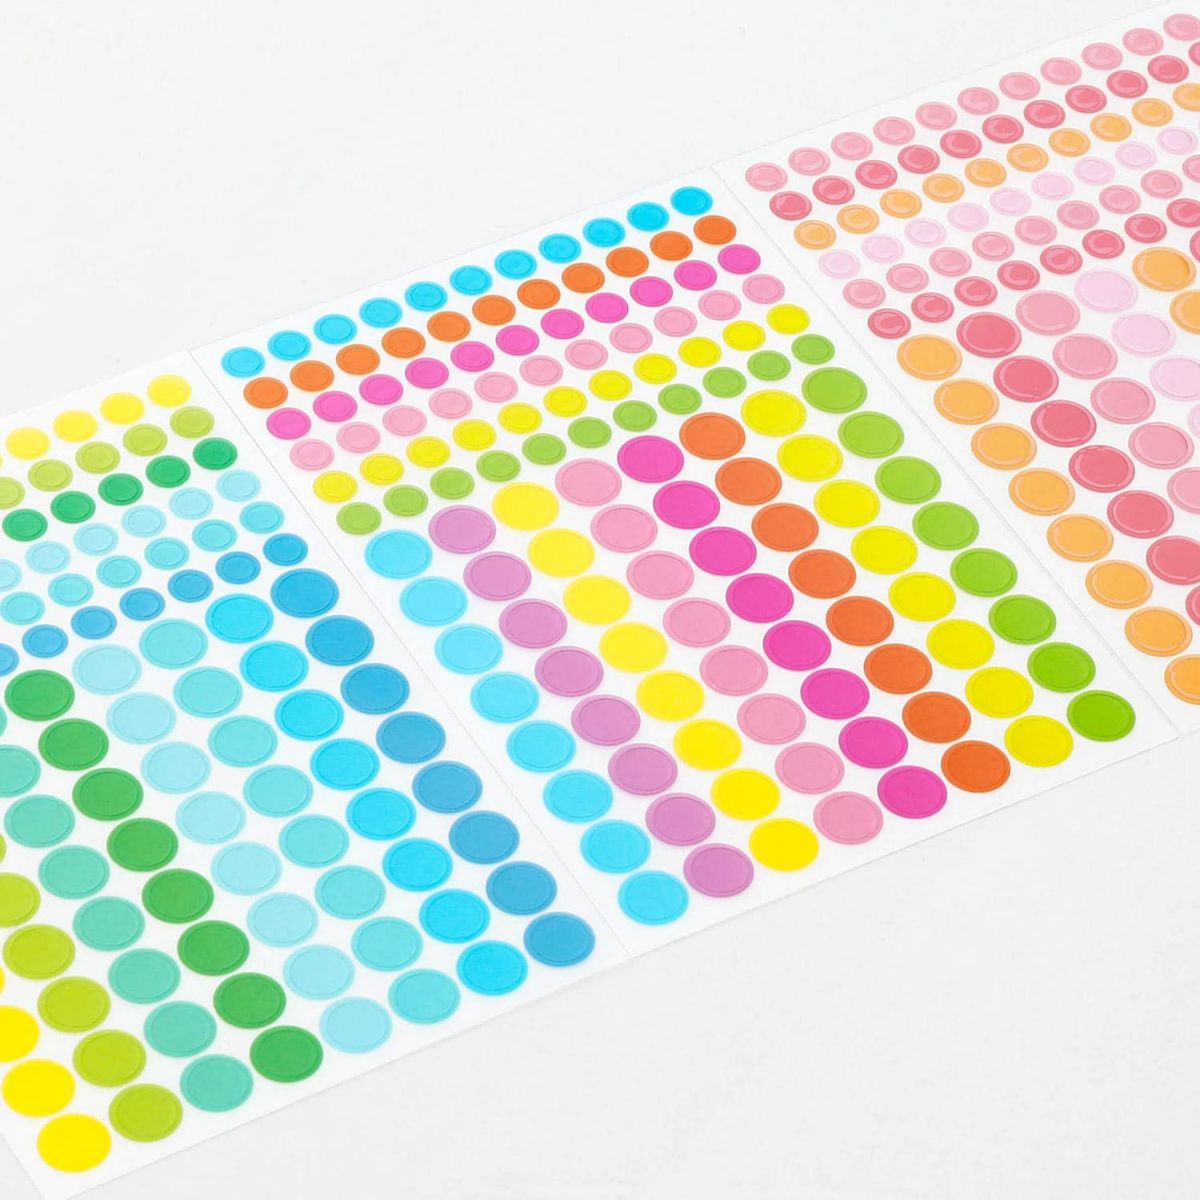 Removable See-Through Dot Sticker